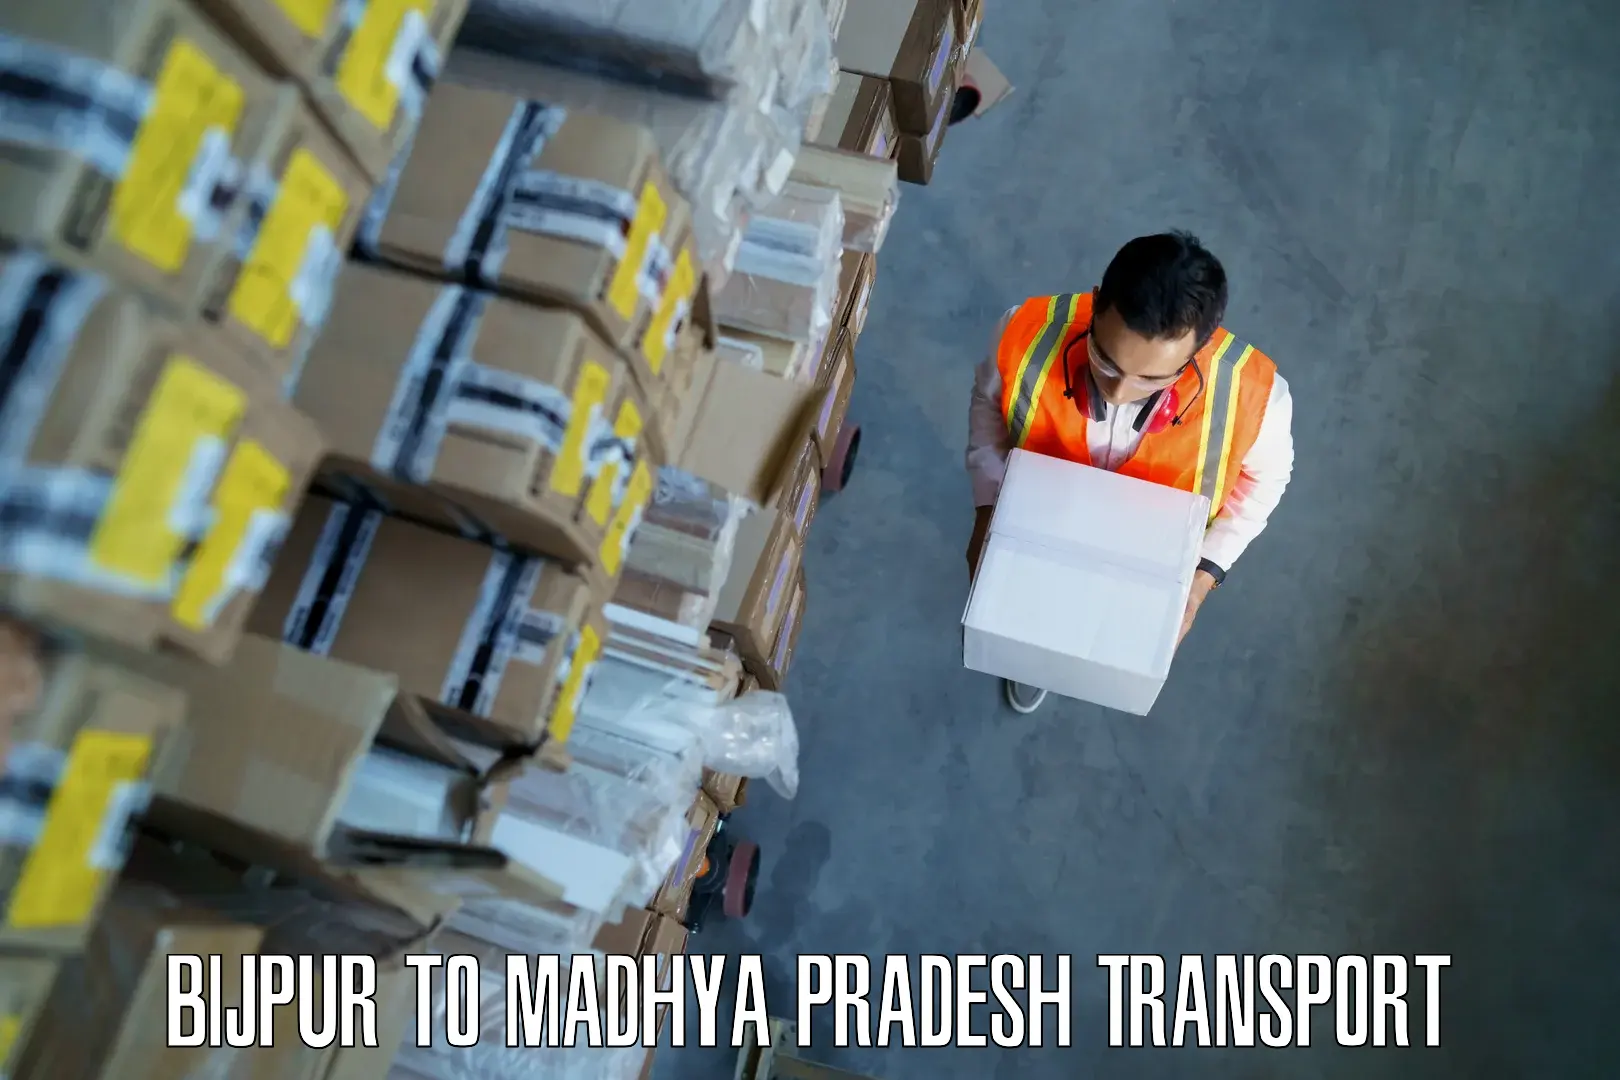 Commercial transport service Bijpur to Raipur Karchuliyan